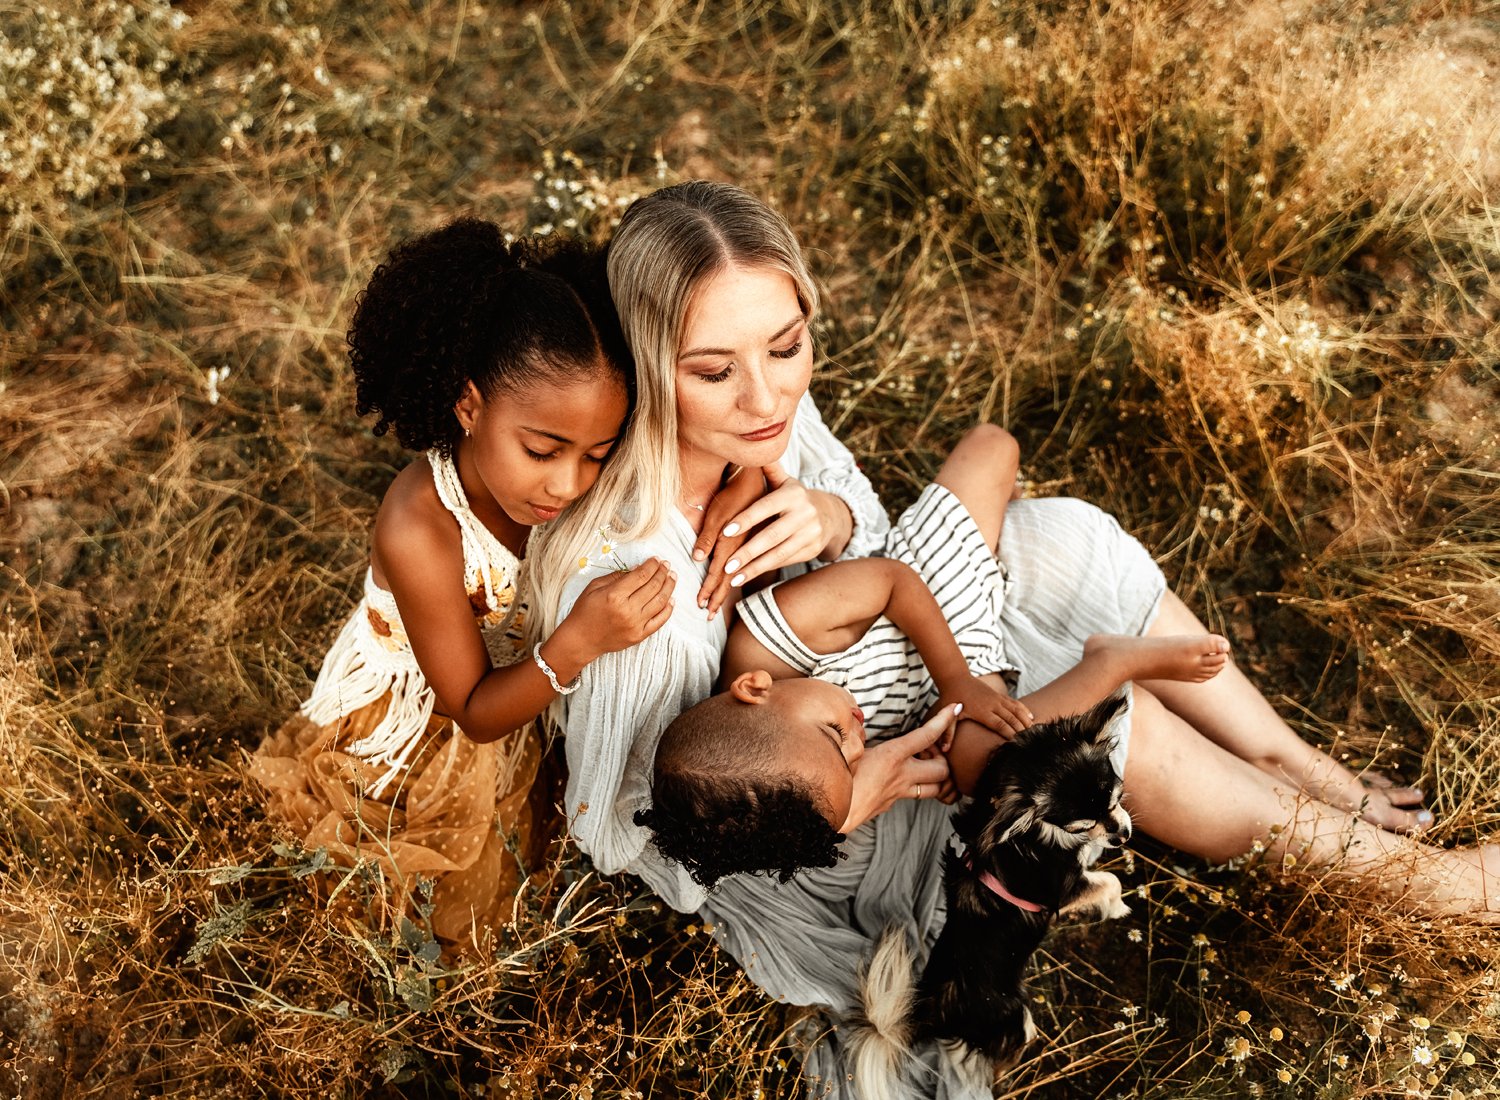 emotive-storytelling-summer-session-of-young-mixed-family-with-young-kids-at-sunset-in-german-country-side-in-ramstein-kmc-by-sarah-havens (16).jpg